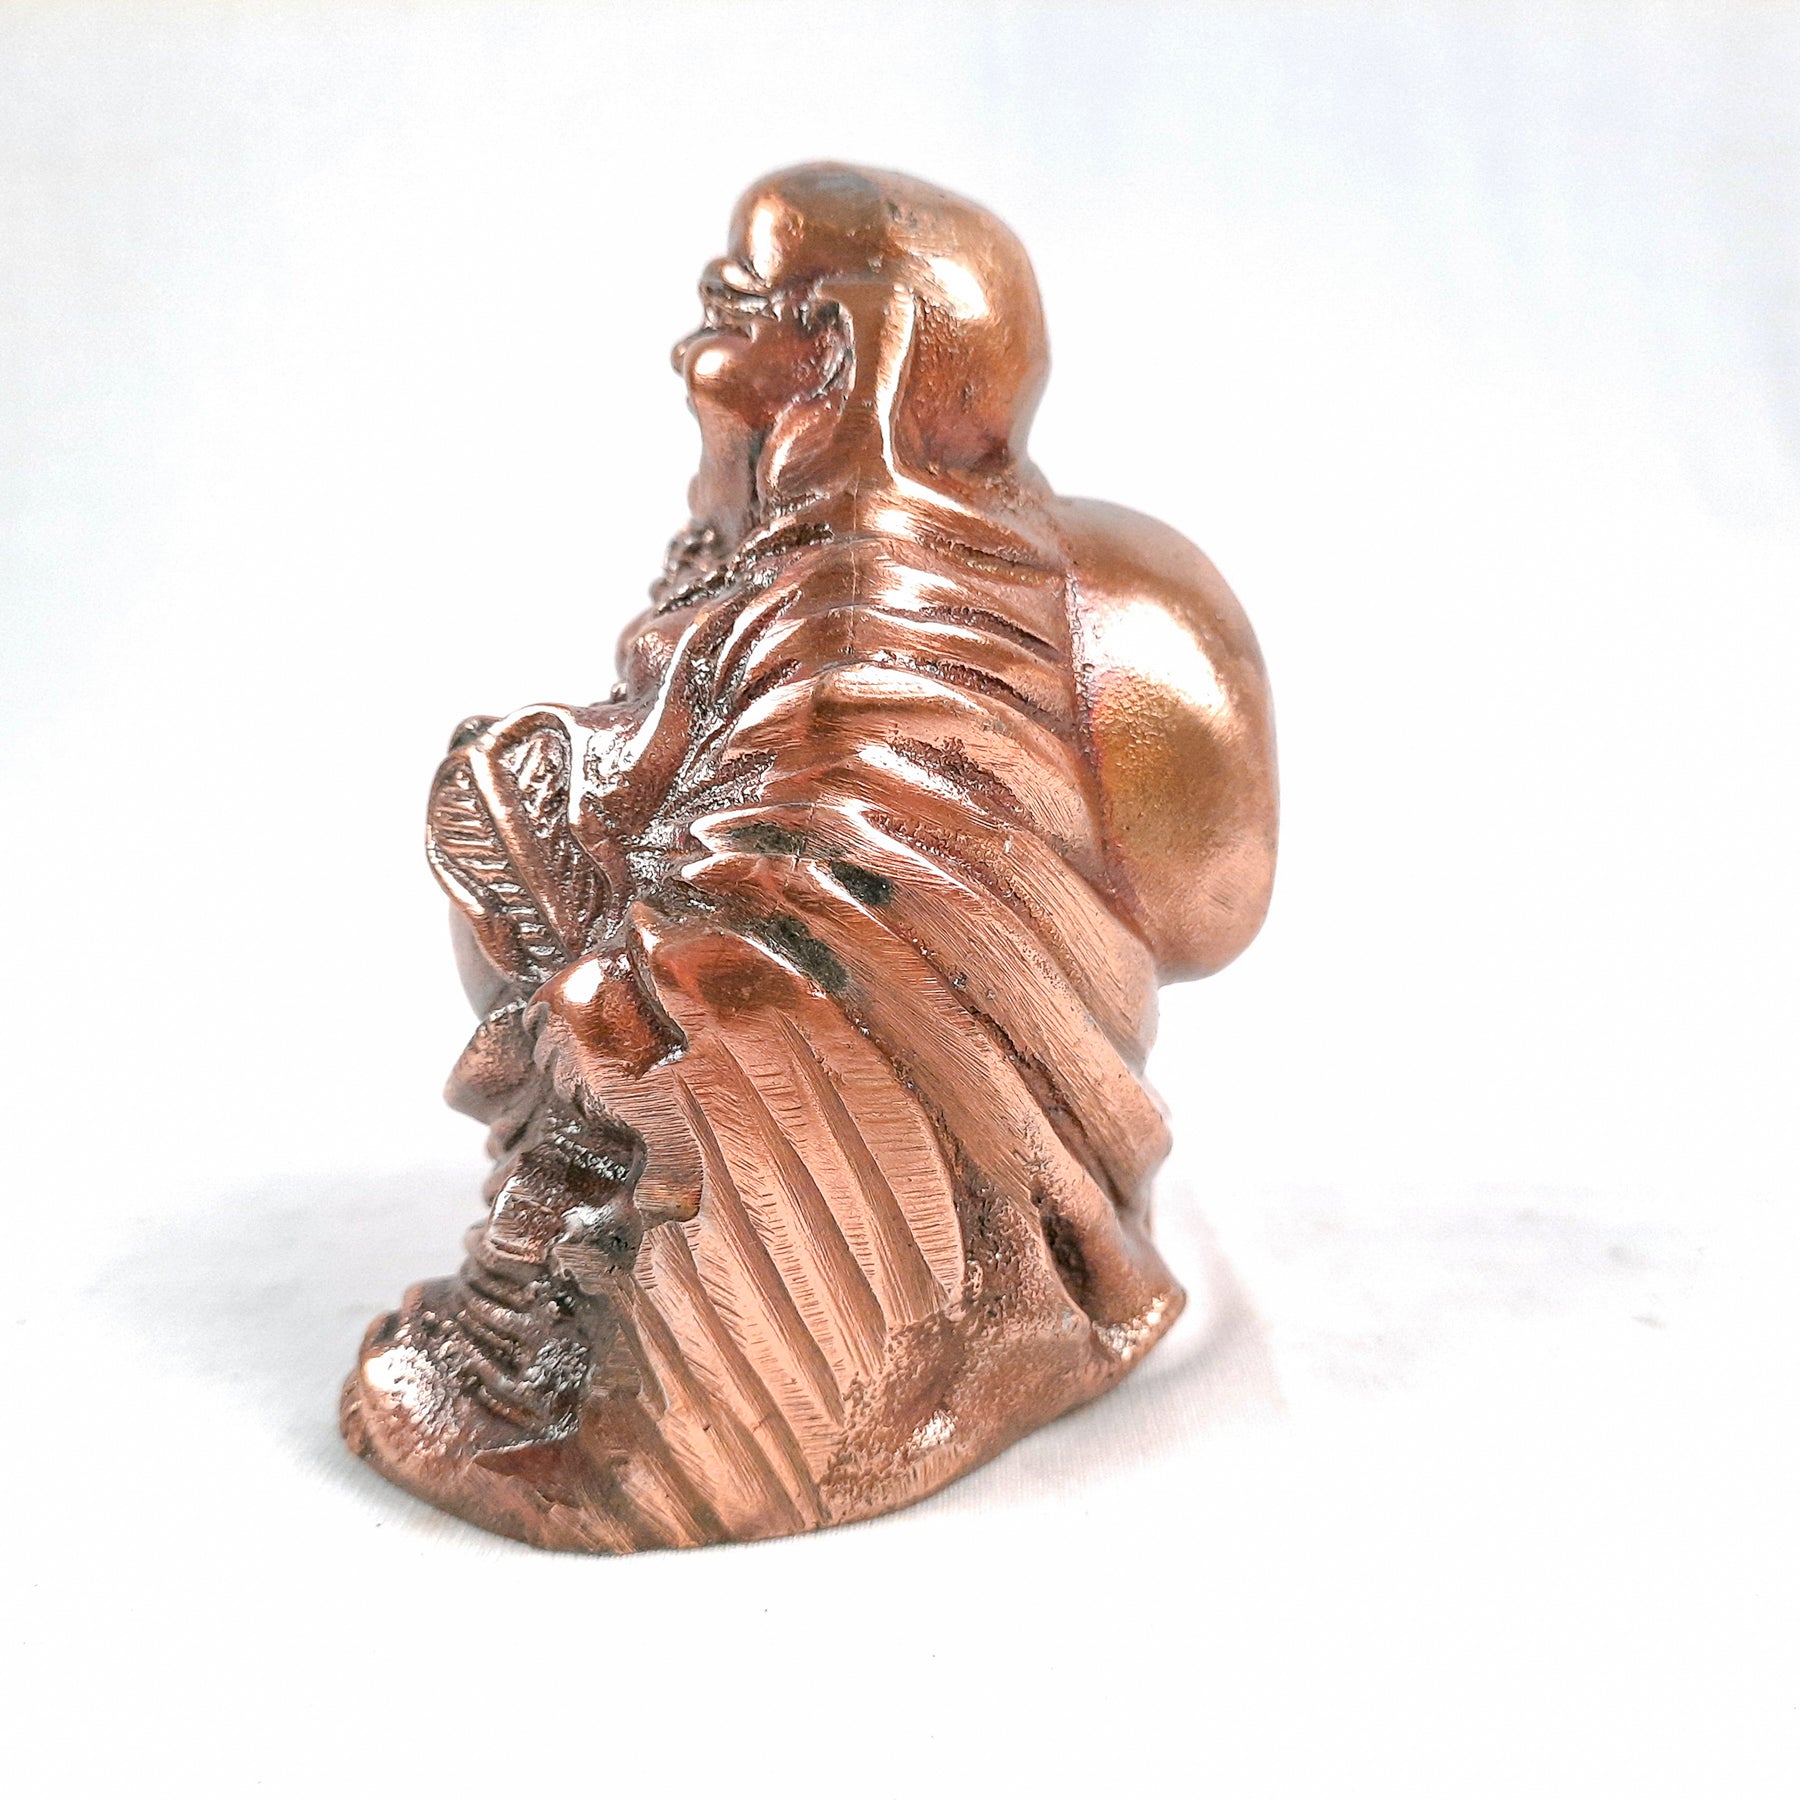 Laughing Buddha With Money Bag Showpiece - For Money, Good Luck, Wealth & Gift- 5 inch-ApkamartLaughing Buddha With Money Bag Showpiece - For Money, Good Luck, Wealth & Gift- 5 inch-Apkamart